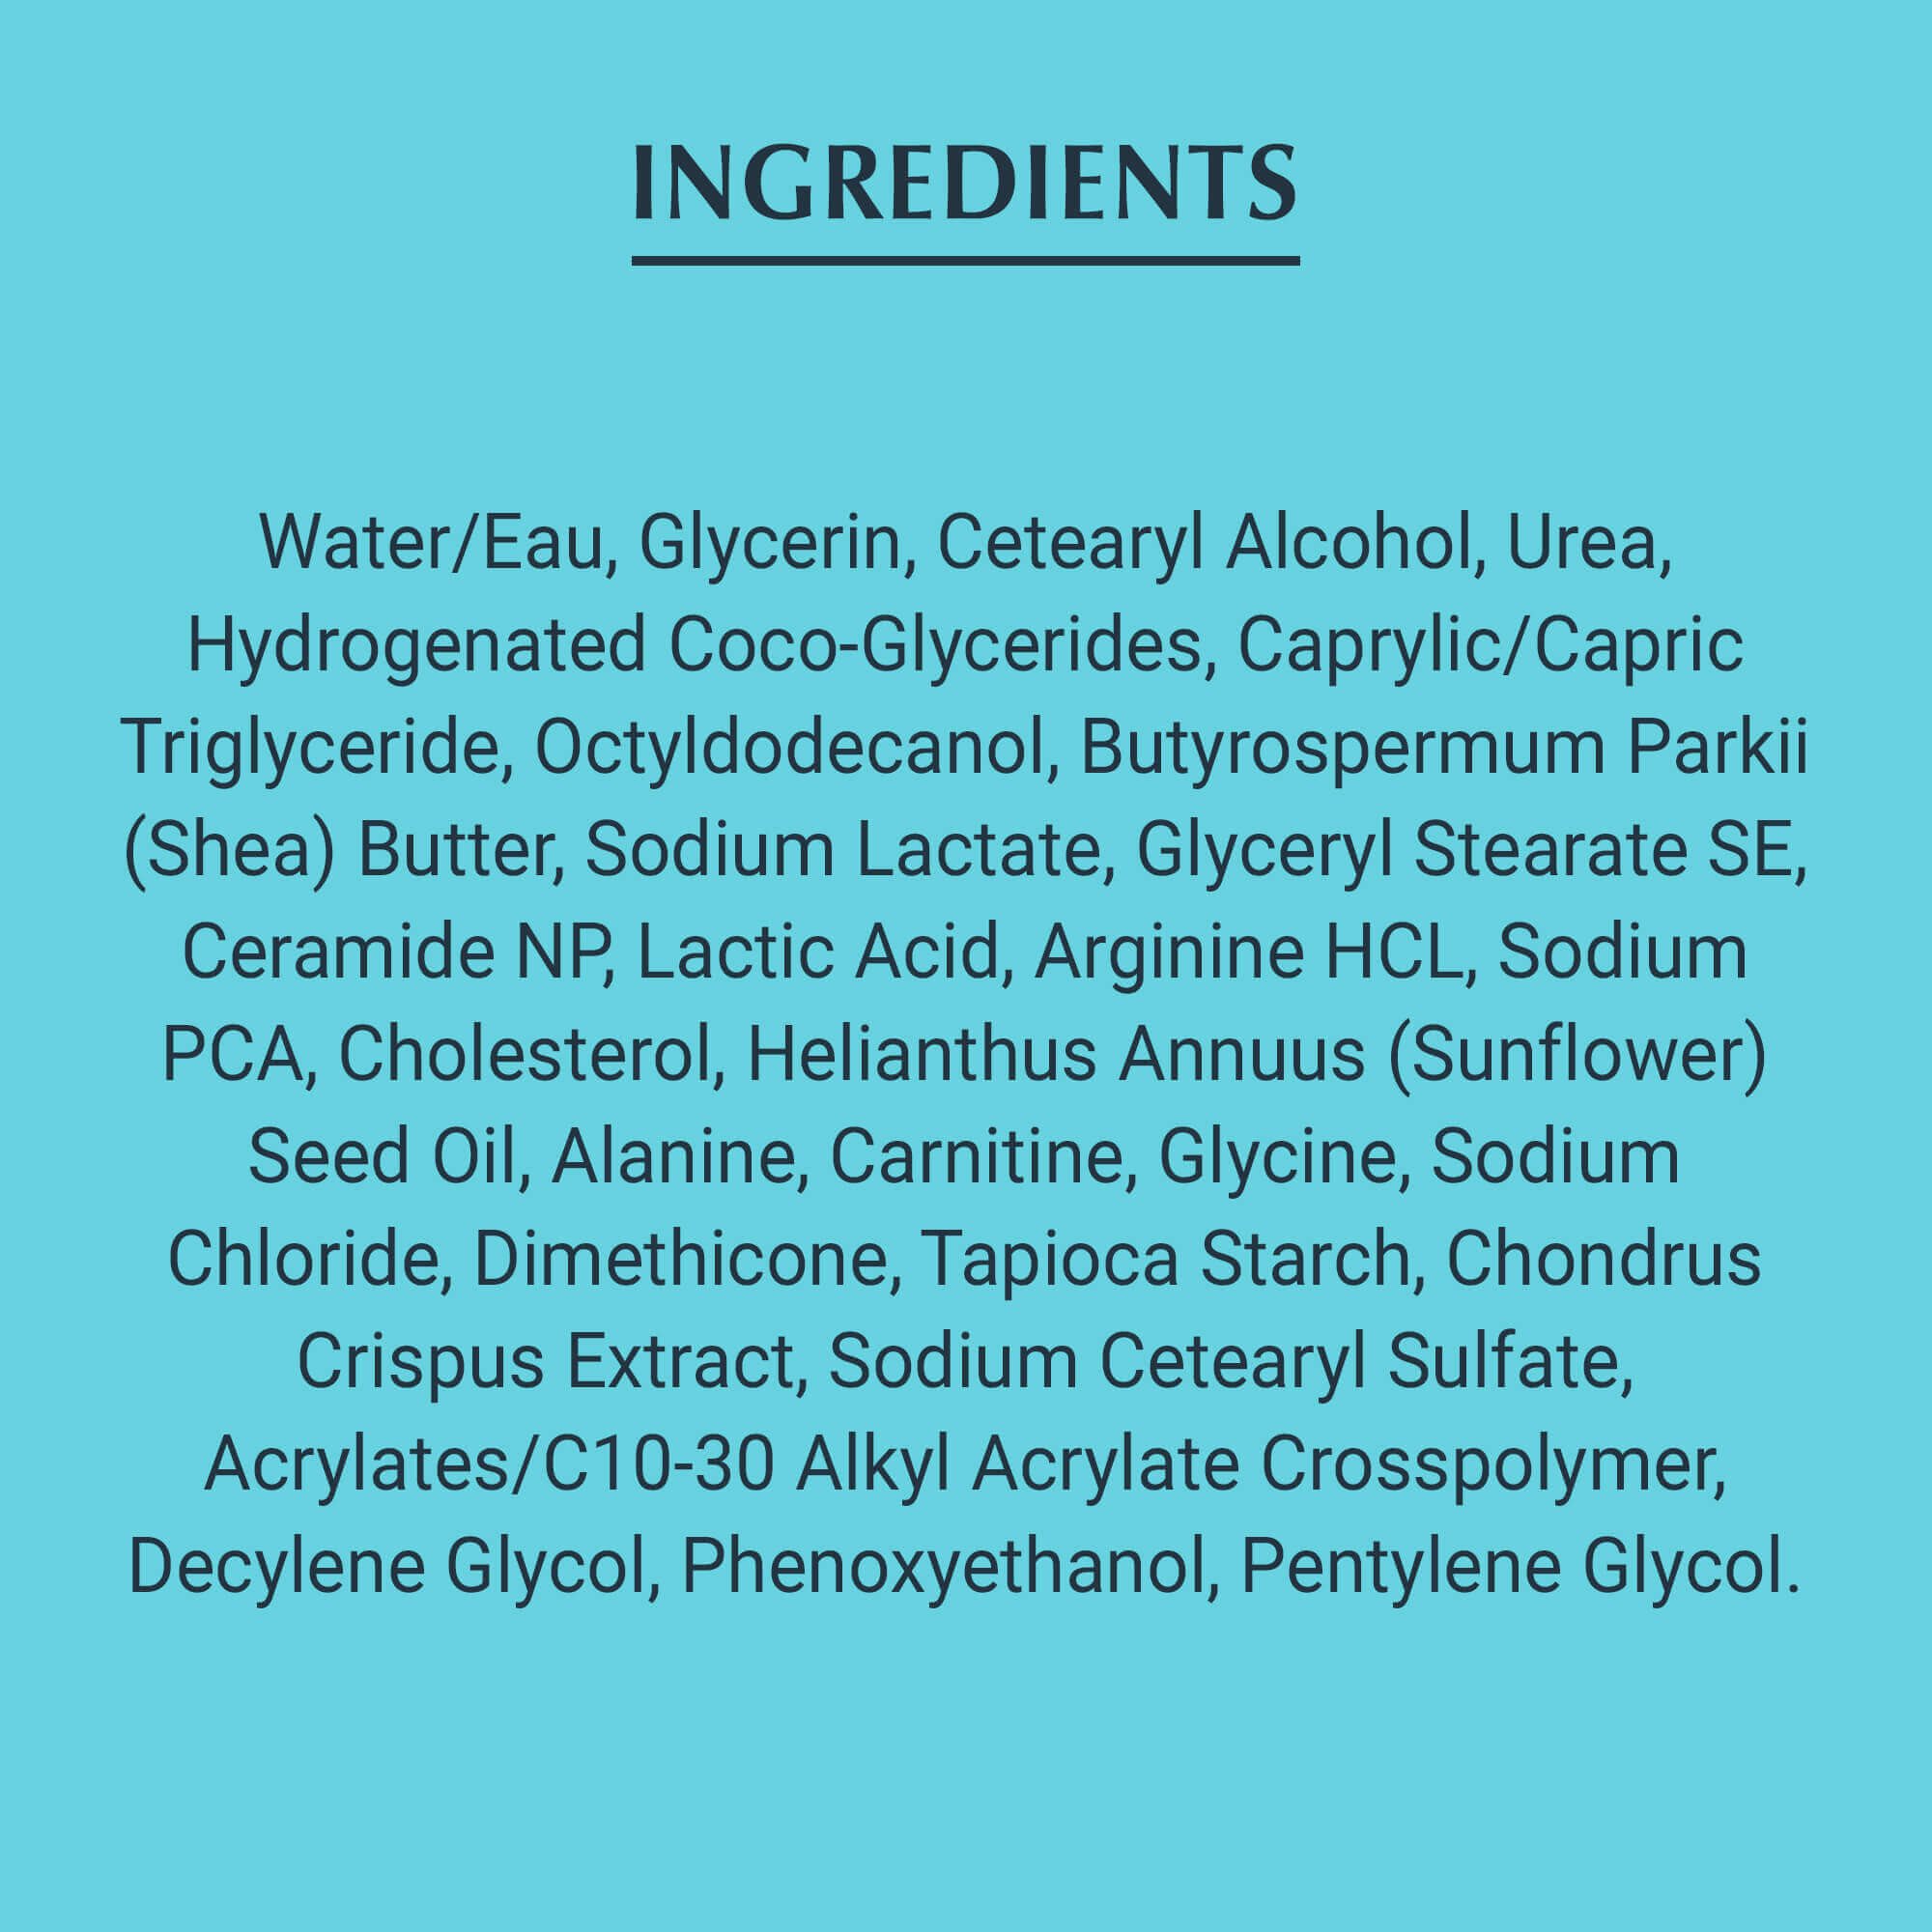 Image of The Eucerin Complete Repair Cream Ingredients list on a bright teal background.